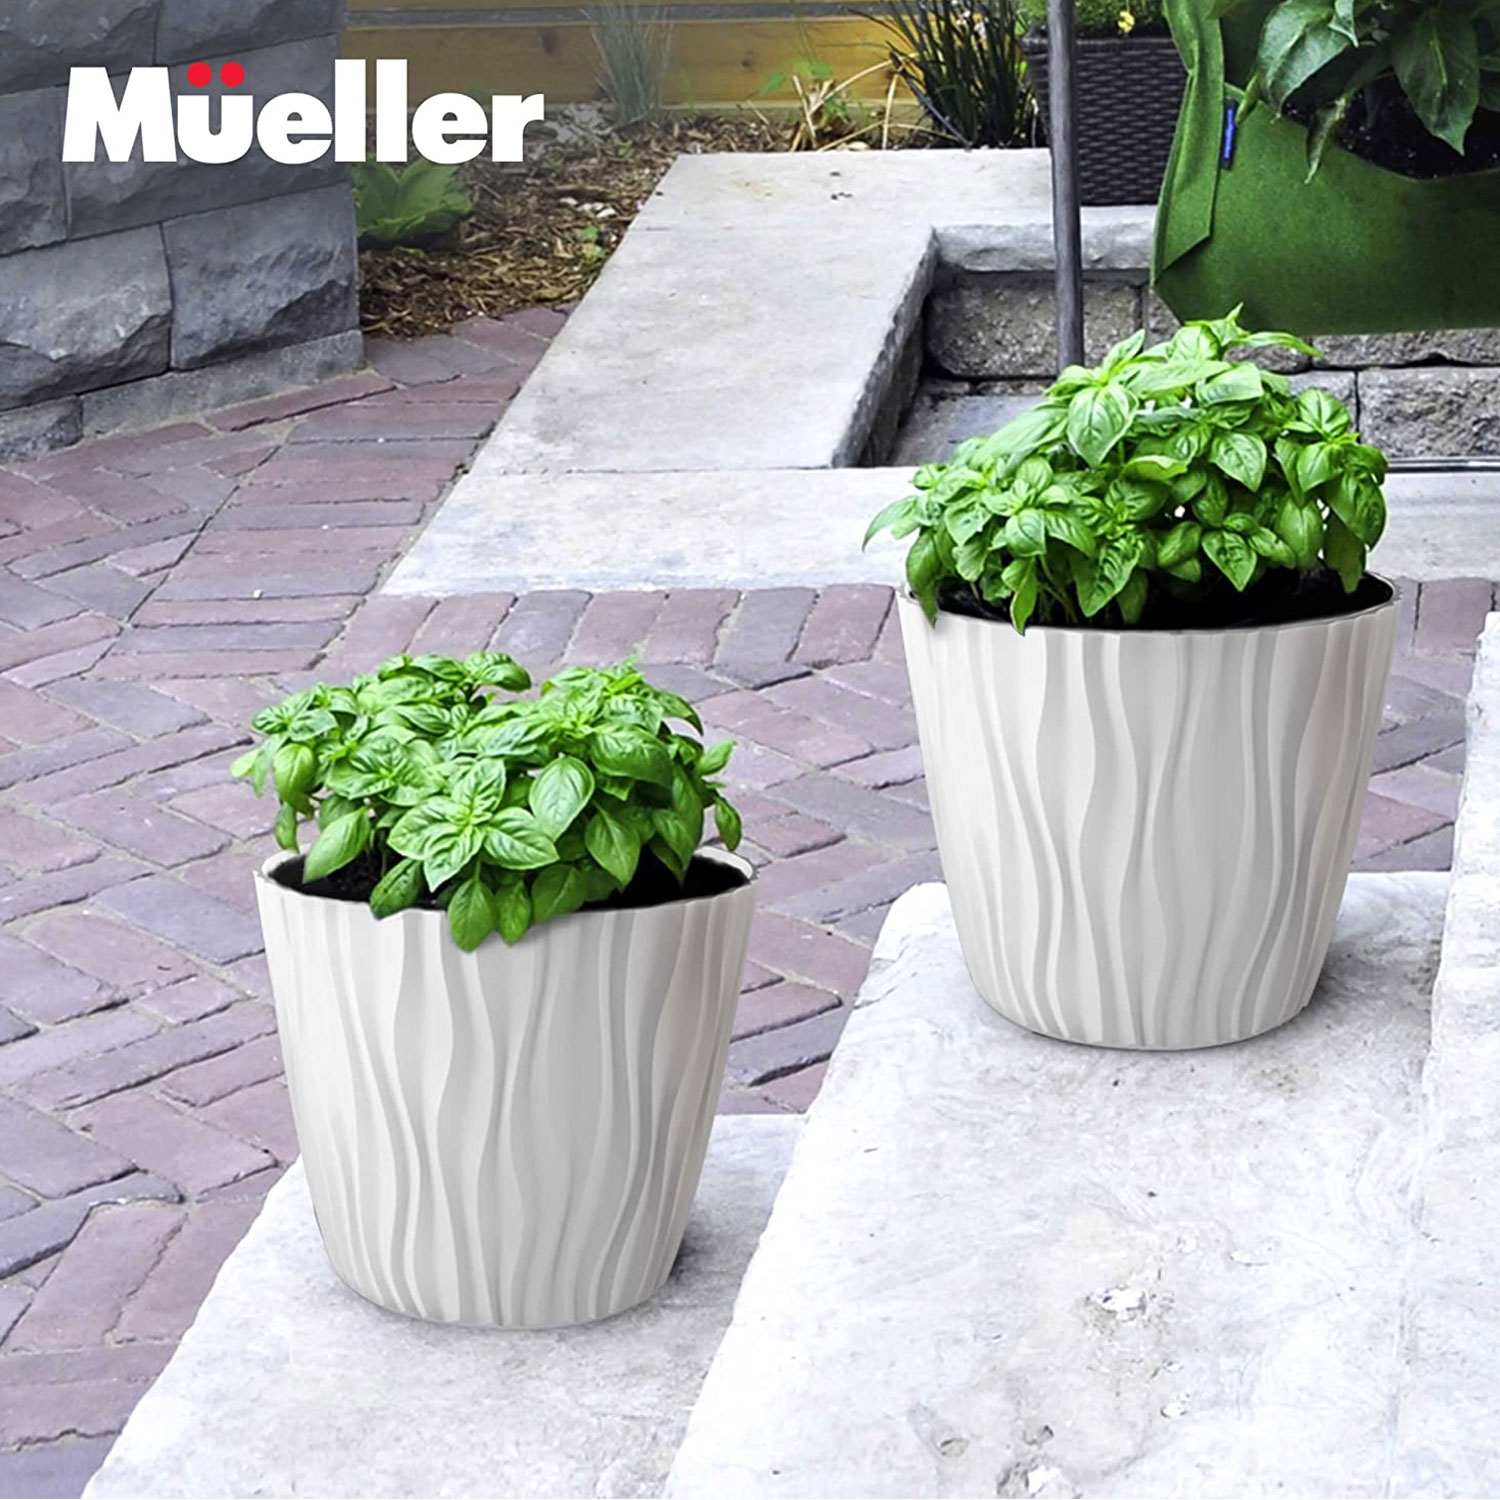 muellerhome_Decorative-Plant-and-Flower-Pots-Small-2-Piece-White-Set-7